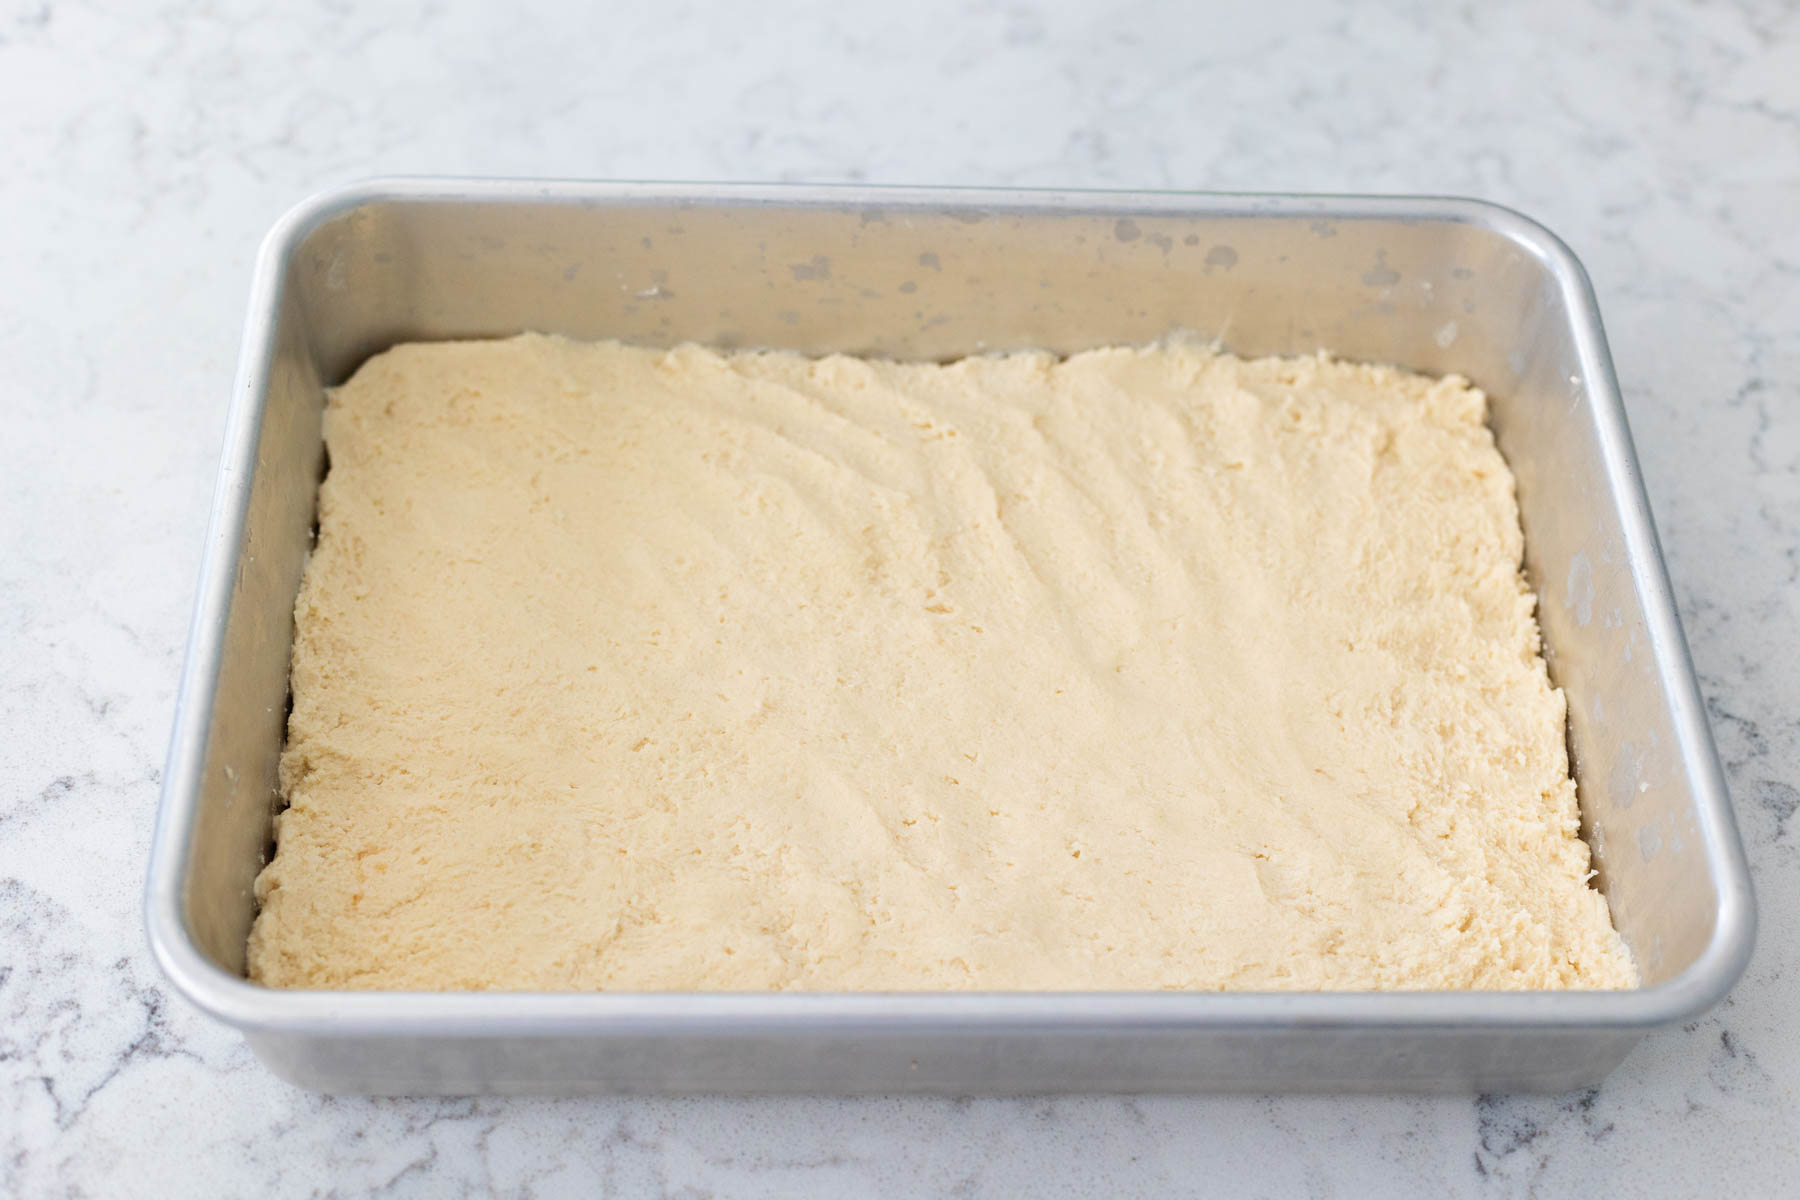 The shortbread cookie dough has been patted into place in a 9x13-inch baking pan.